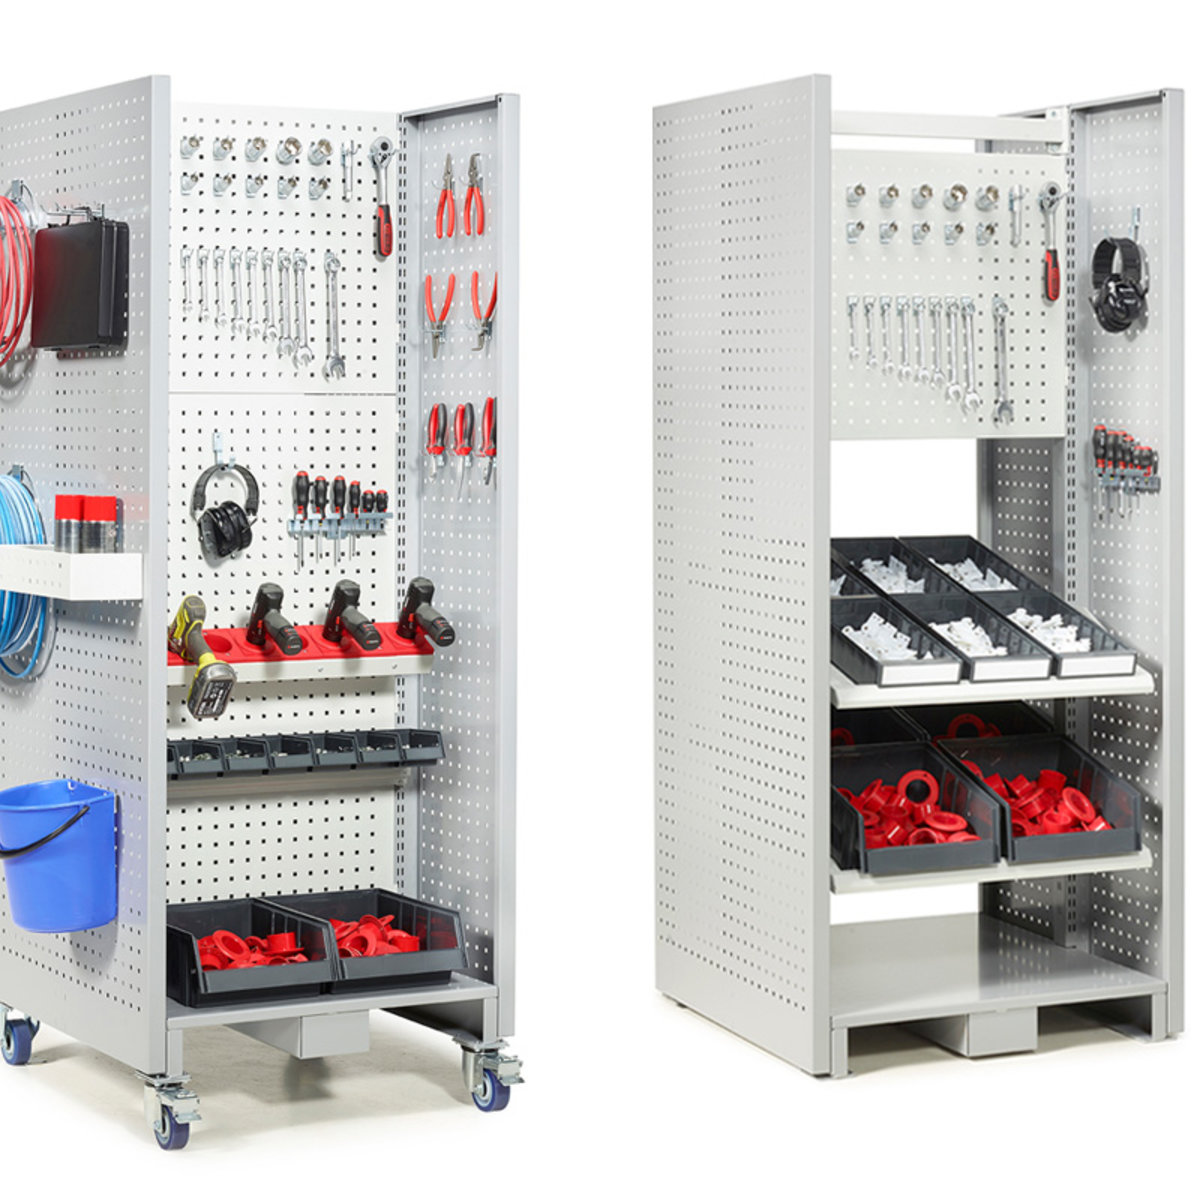 New product launch: Treston Tower storage and workstation unit to ...